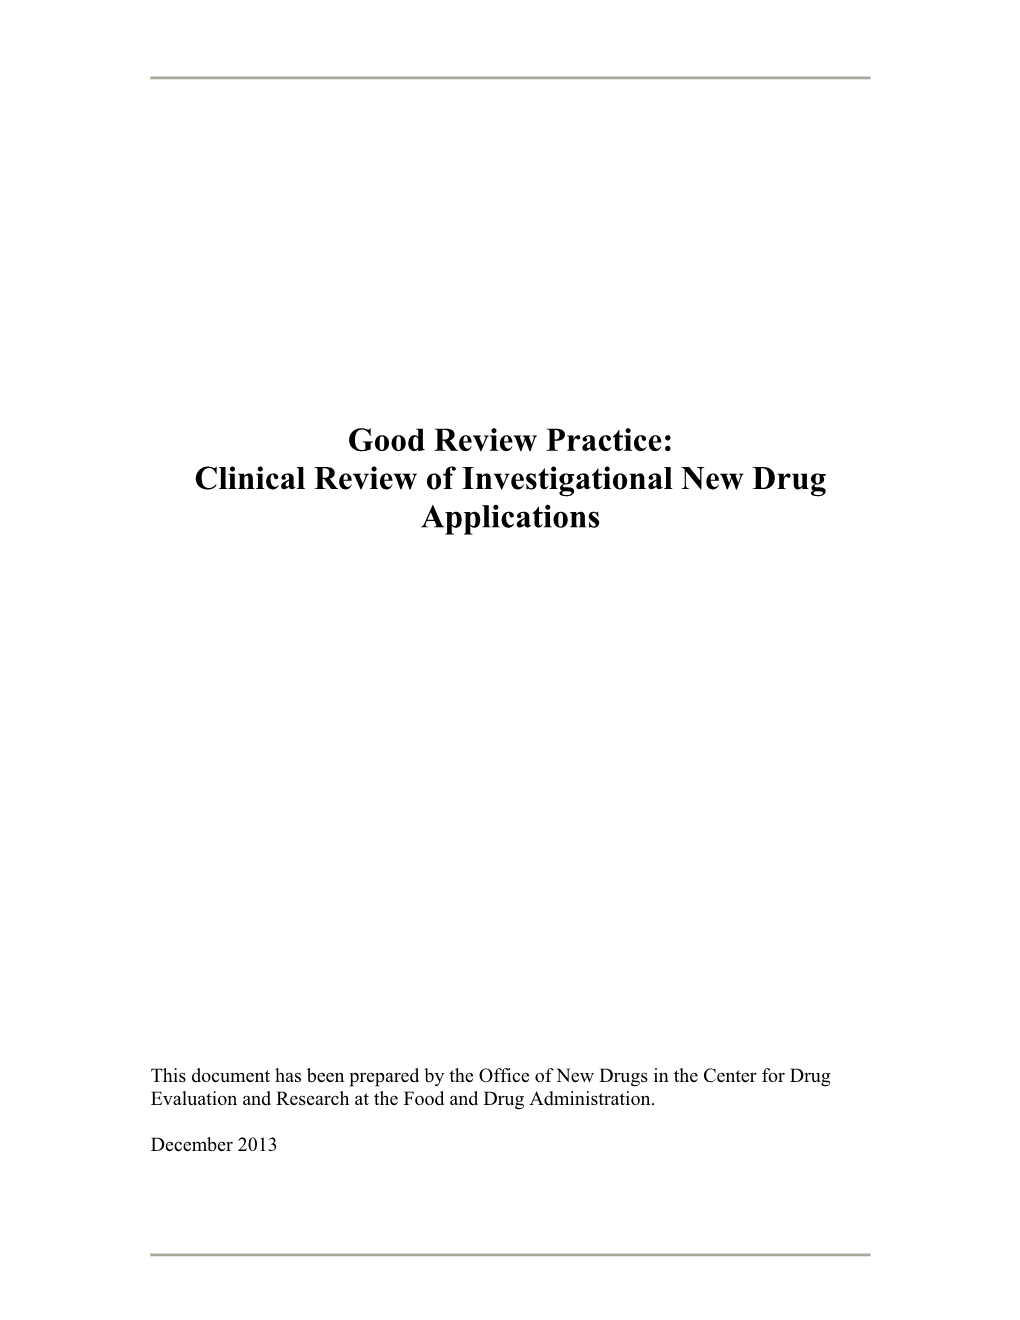 Clinical Review of Investigational New Drug Applications